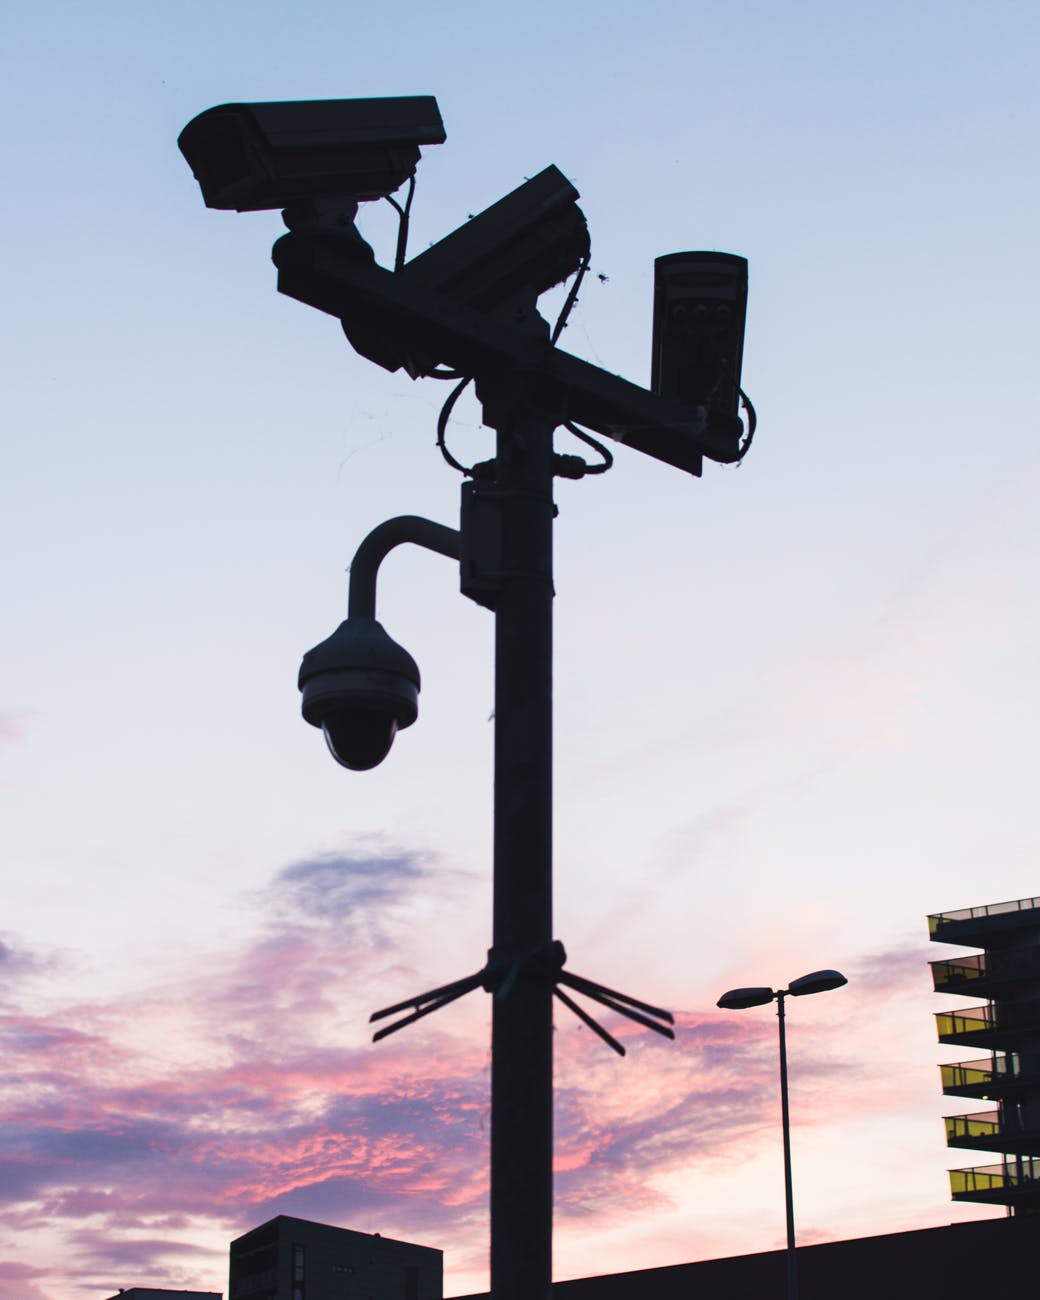 black lamp post with mounted cameras